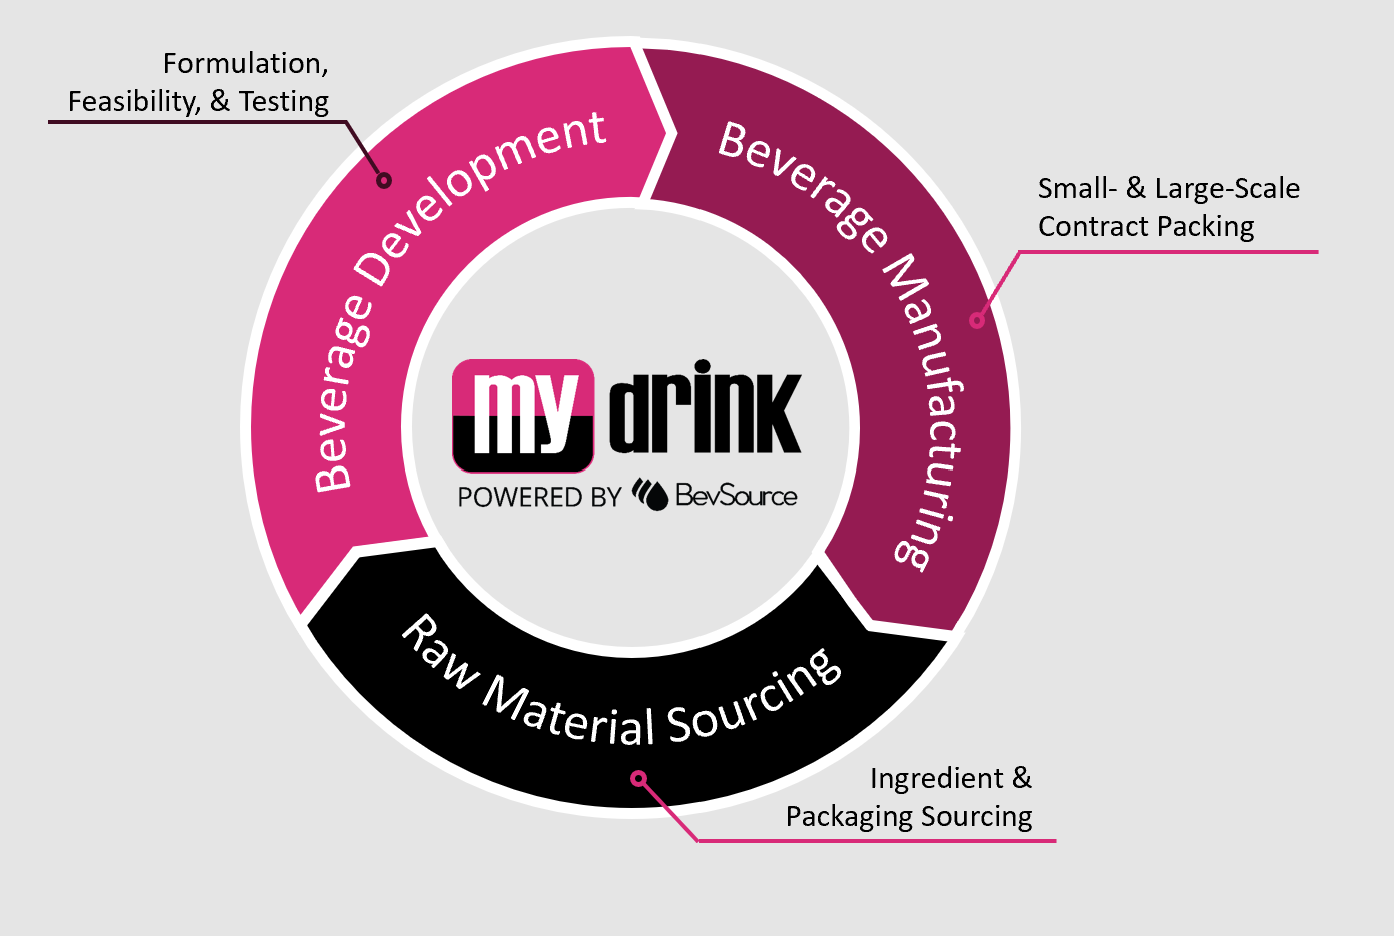 MyDrink Services: Beverage Development, Manufacturing, and Raw Material Sourcing